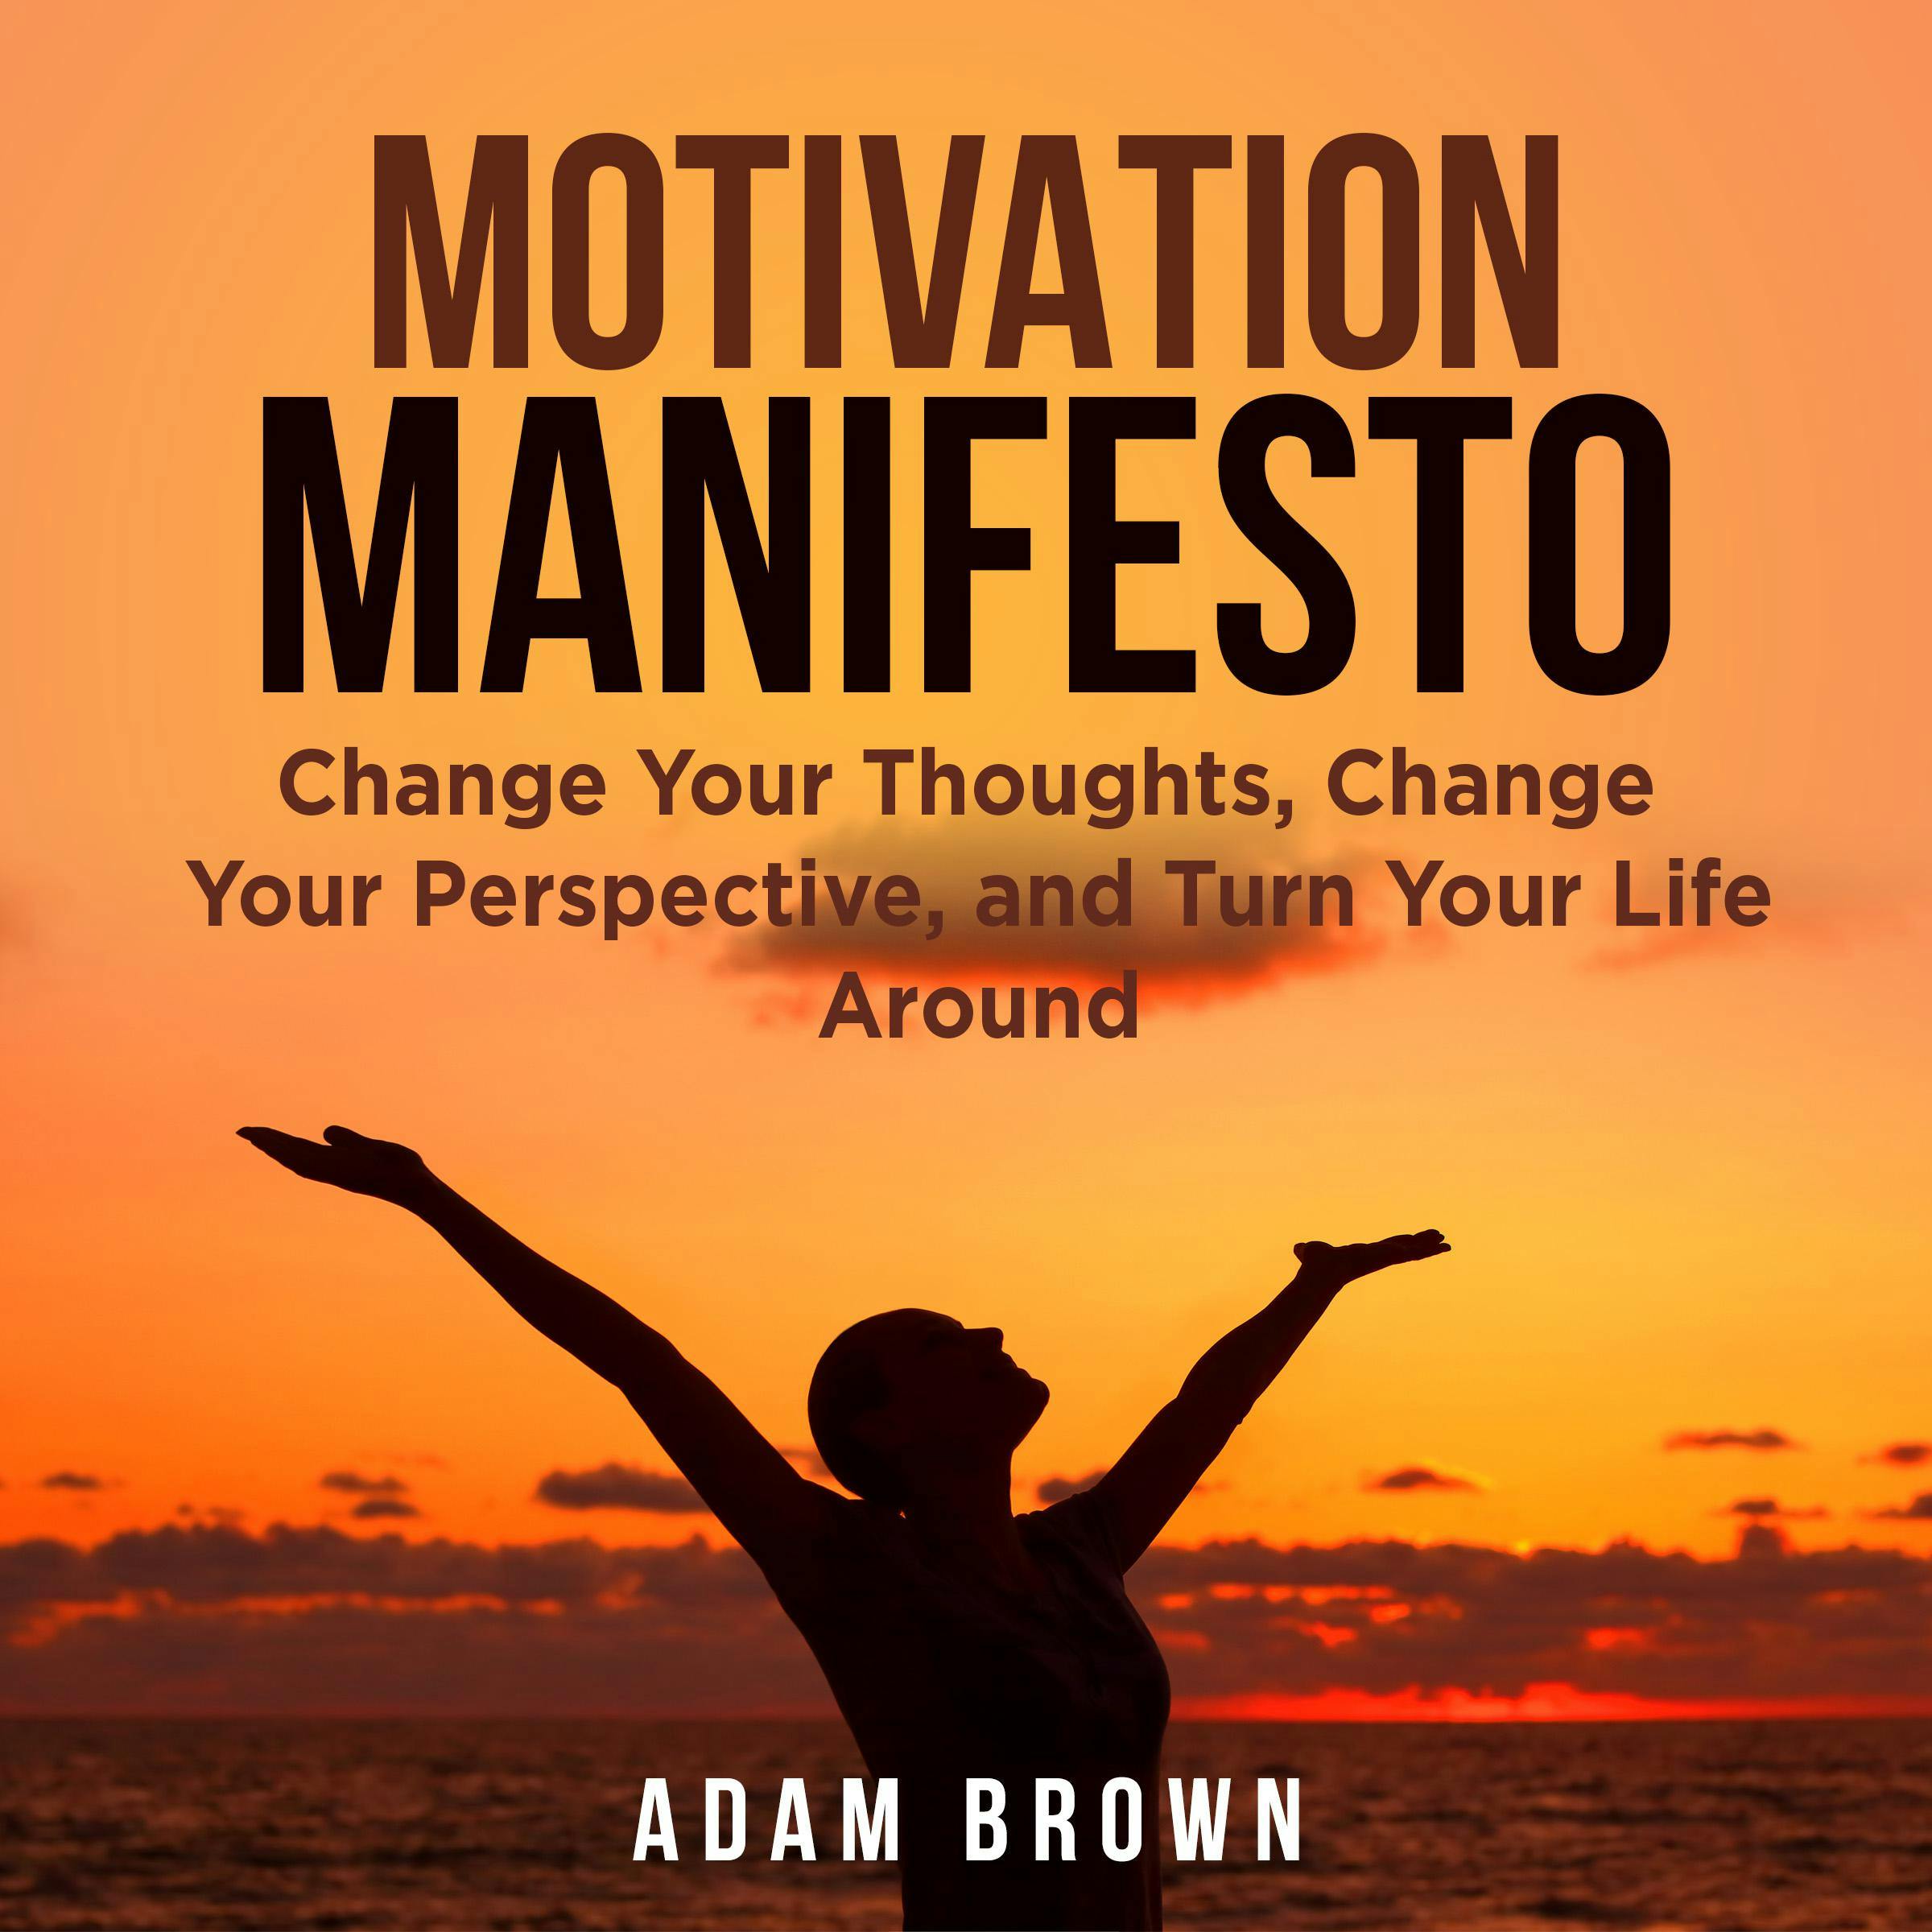 Motivation Manifesto: Change Your Thoughts, Change Your Perspective, and Turn Your Life Around - Adam Brown